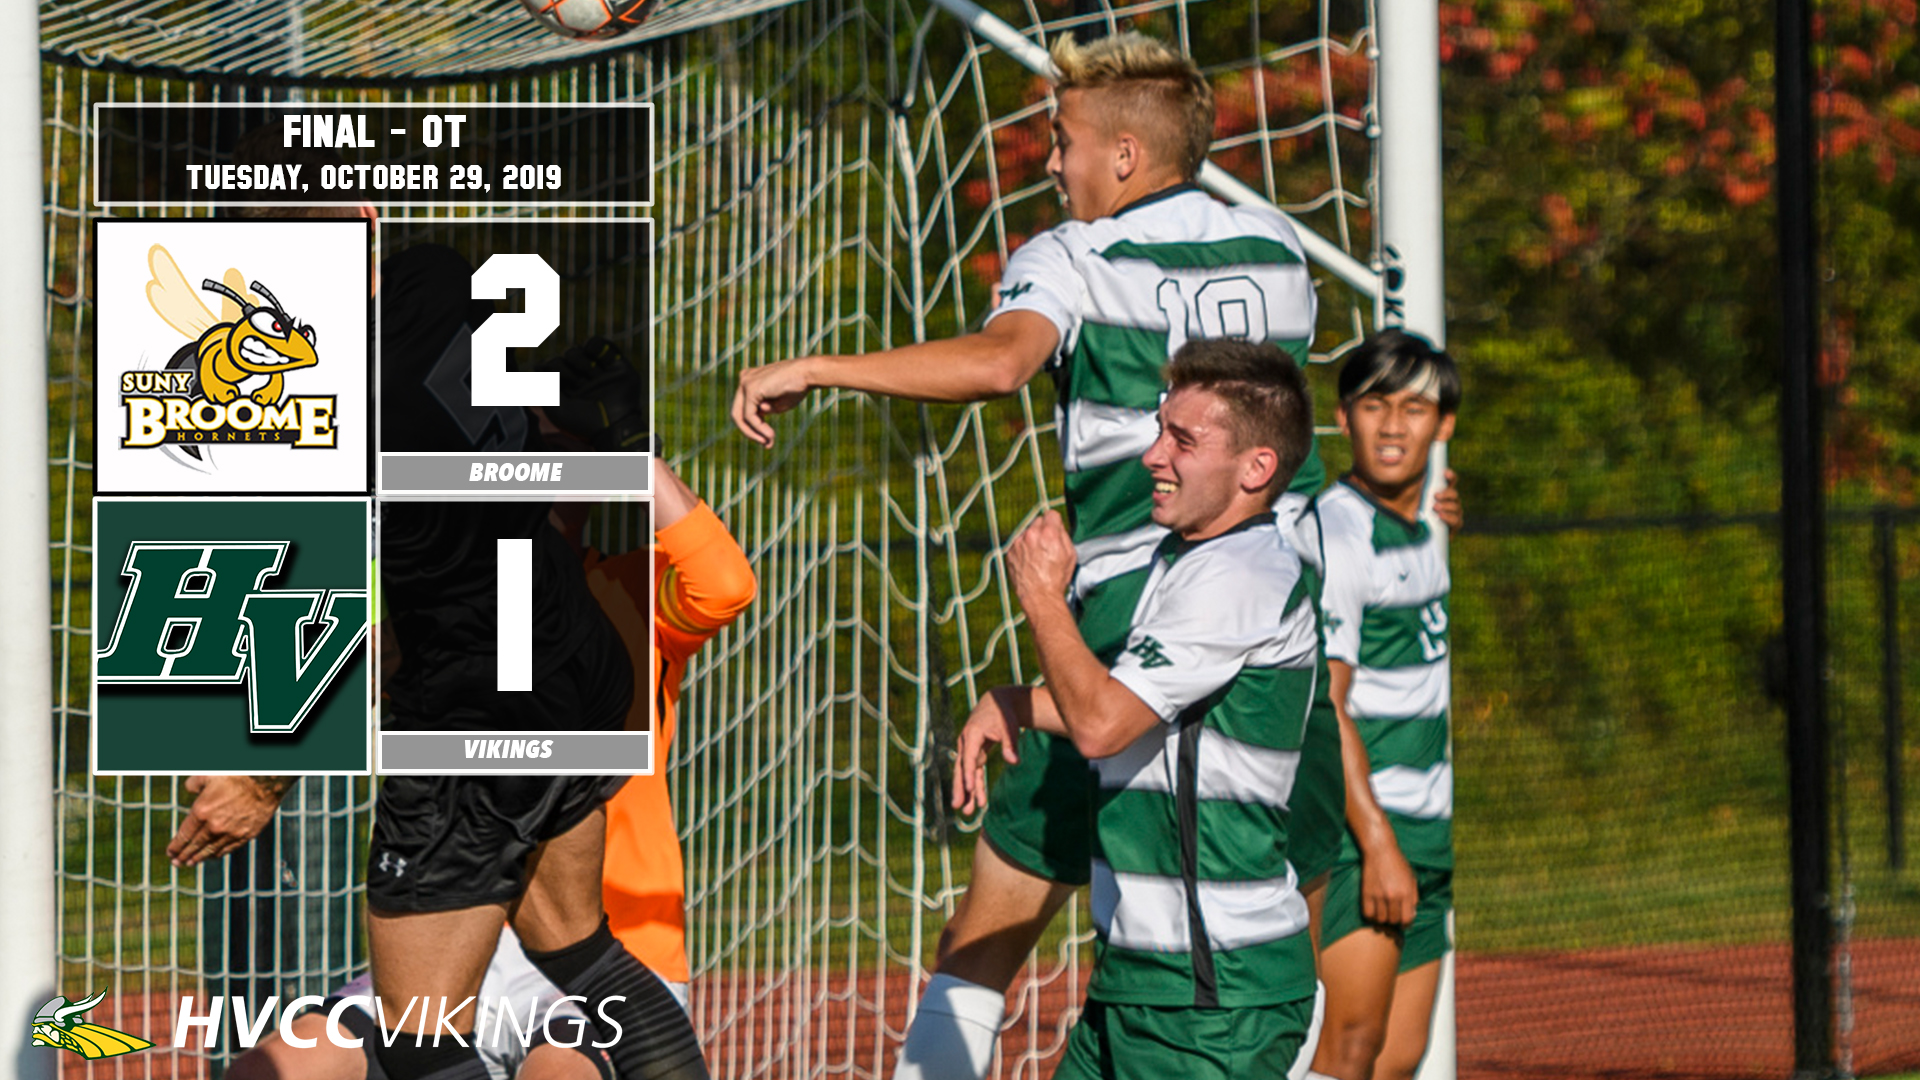 Men's soccer defeated 2-1 in overtime on Oct. 29, 2019 at Broome. 